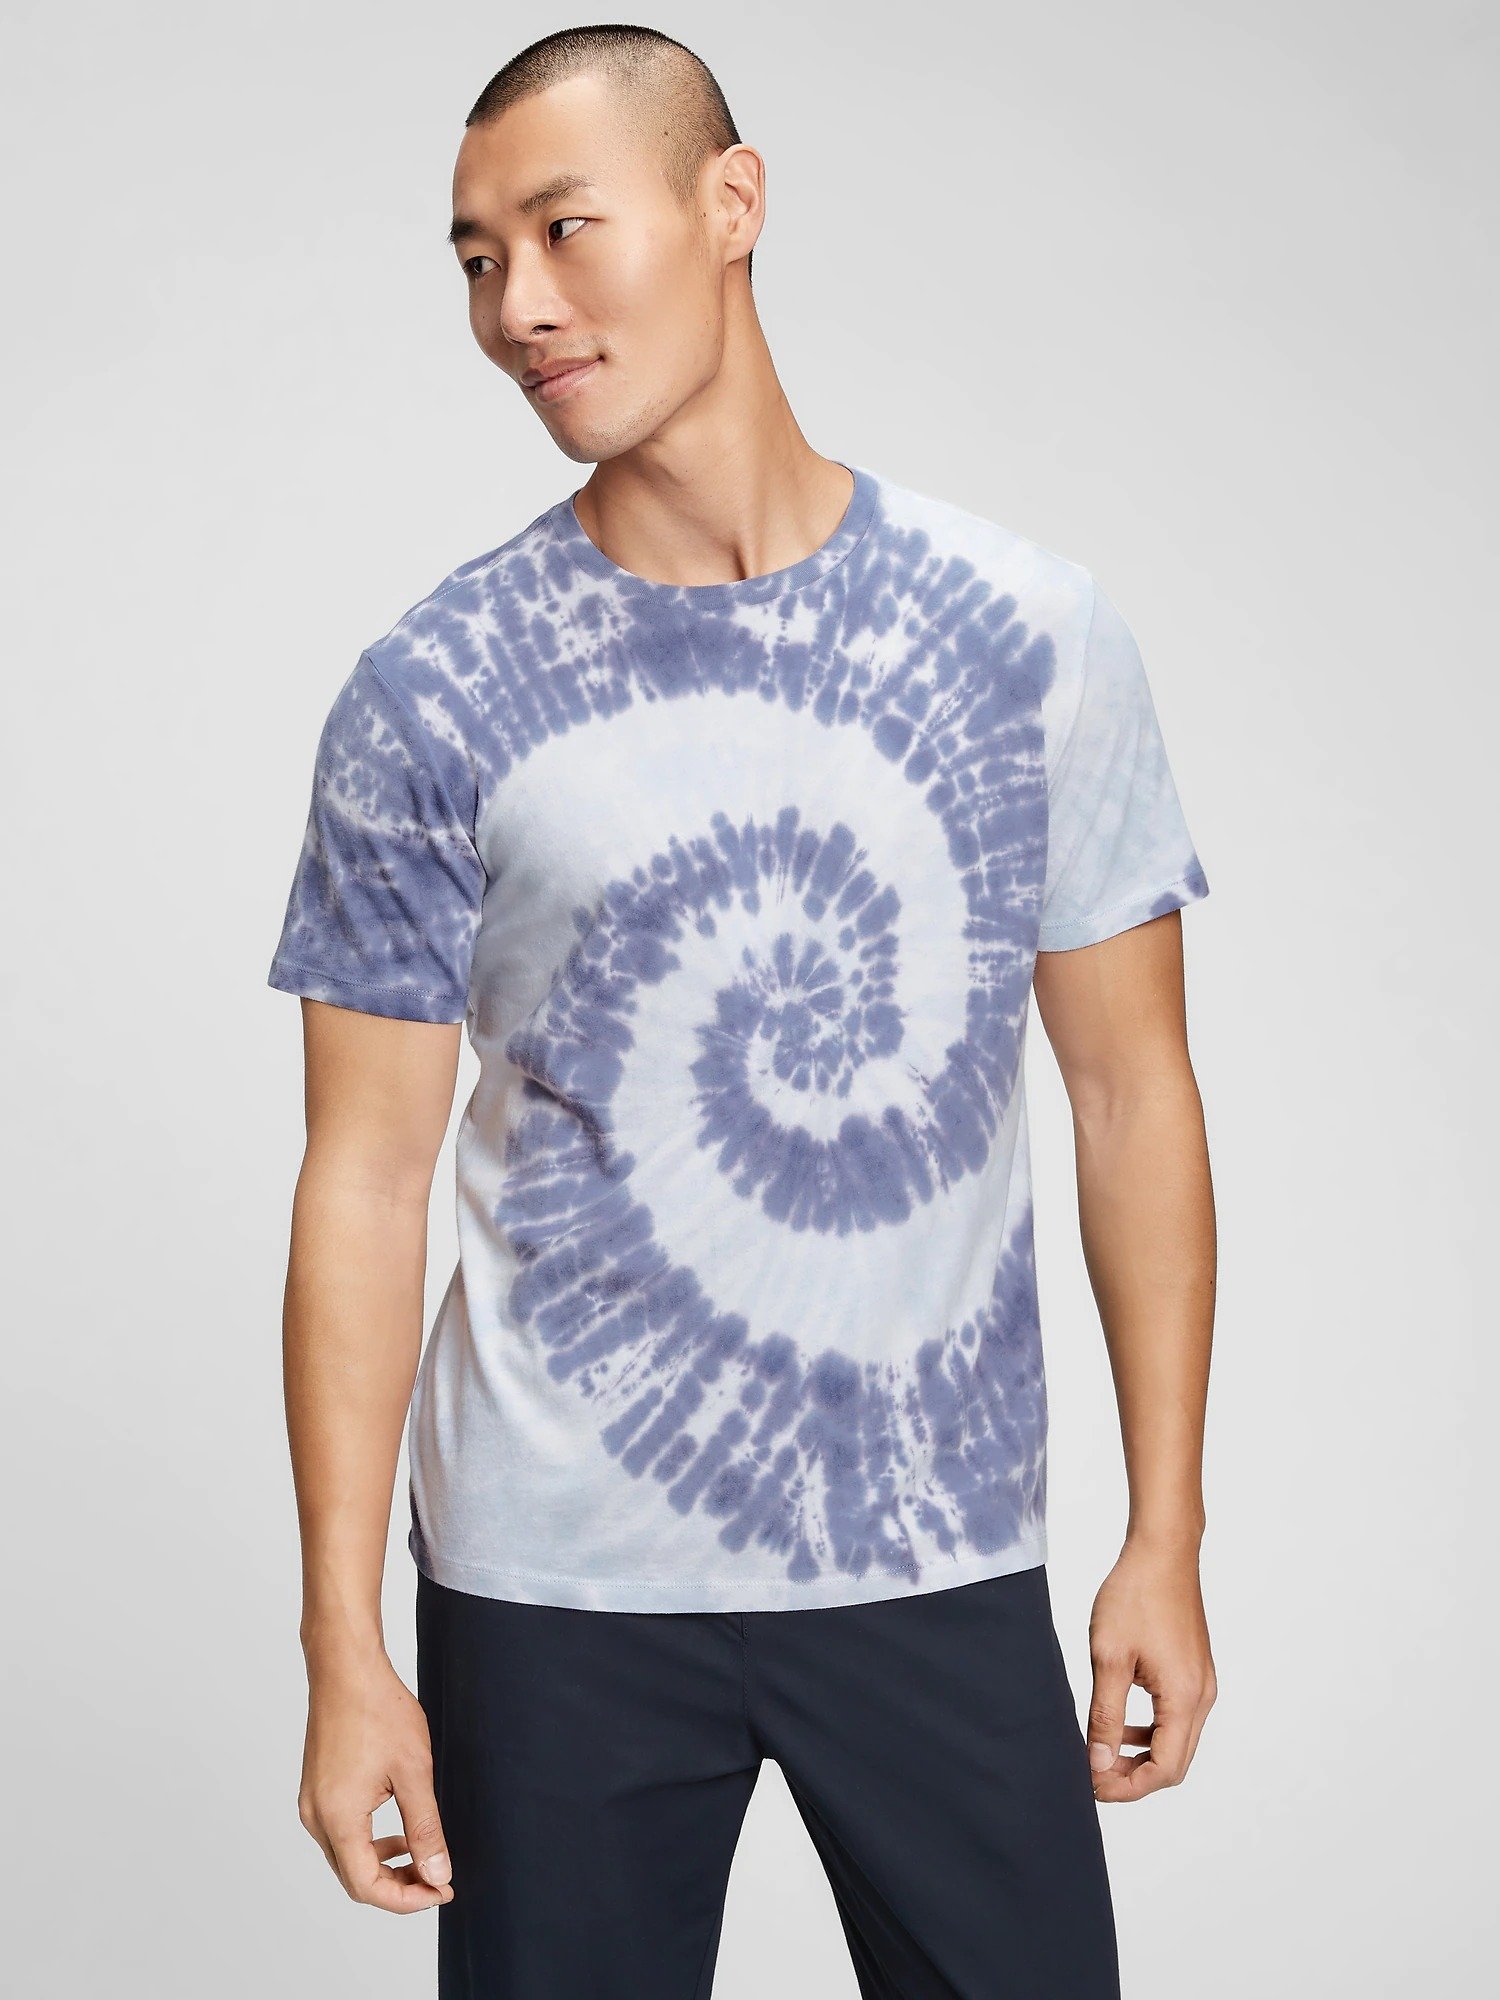 Tie-Dye T-Shirt product image